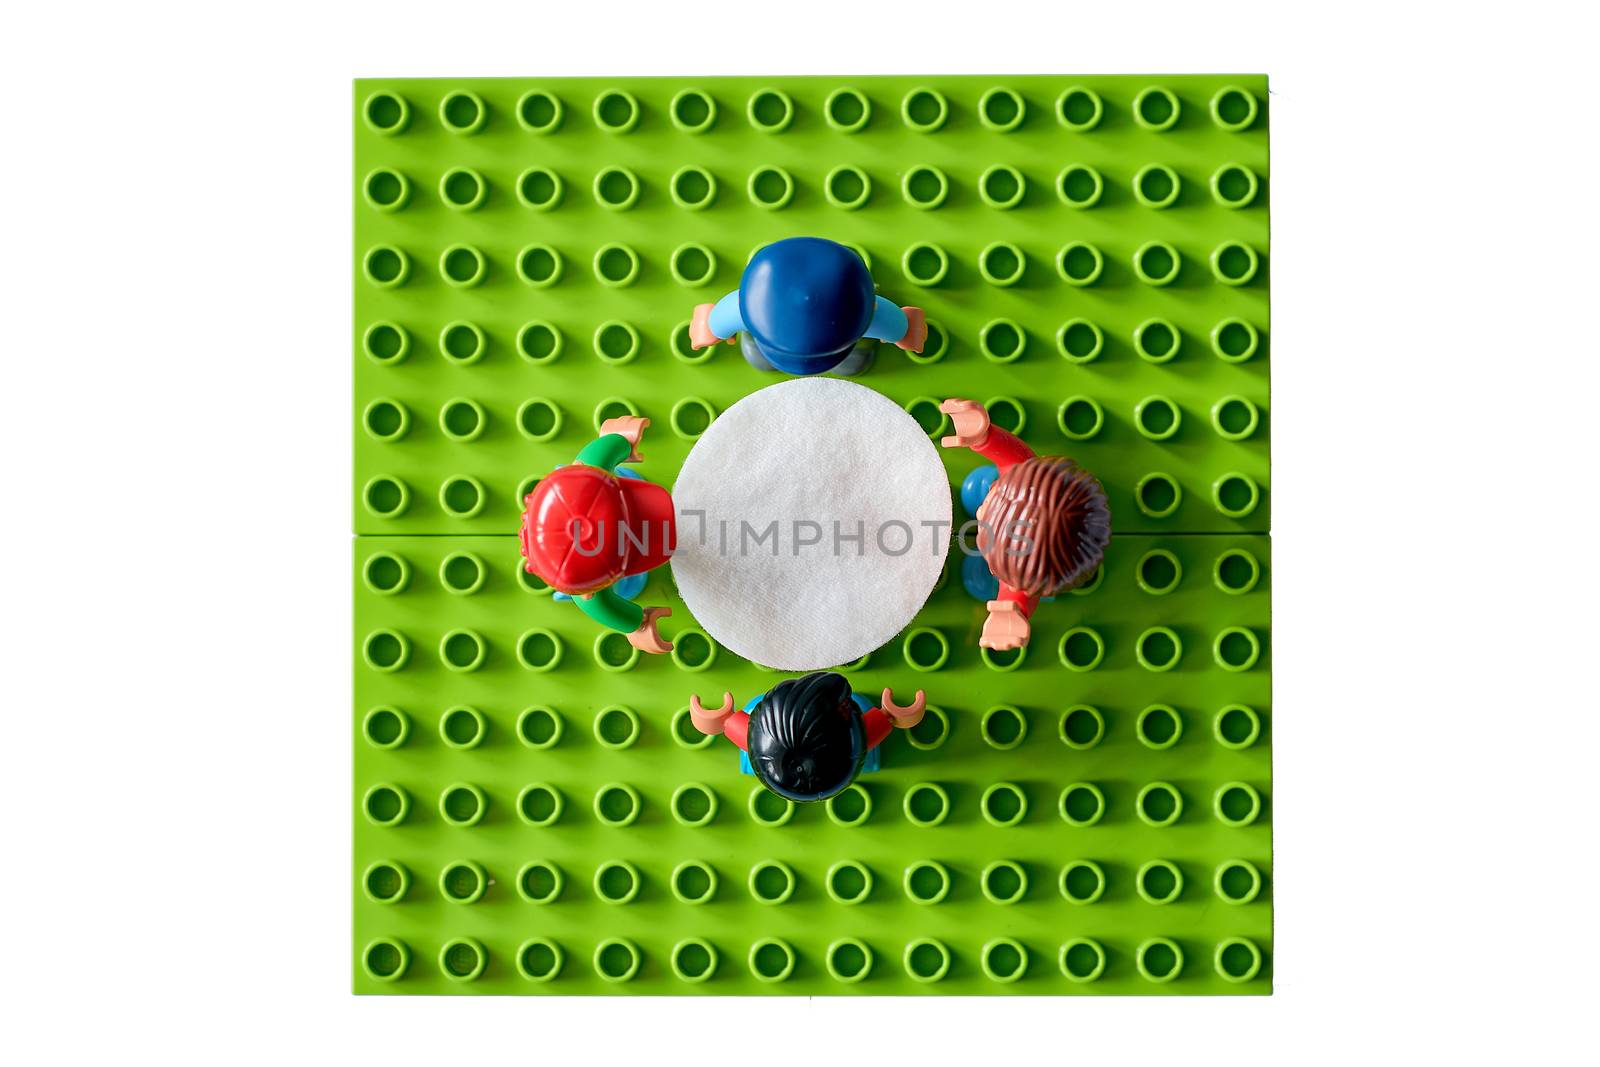 Donetsk, Ukraine - February 28, 2019: Studio daylight shooting of Lego people toys business meeting at office around the table. Business meeting consept, teamwork, planning and working.